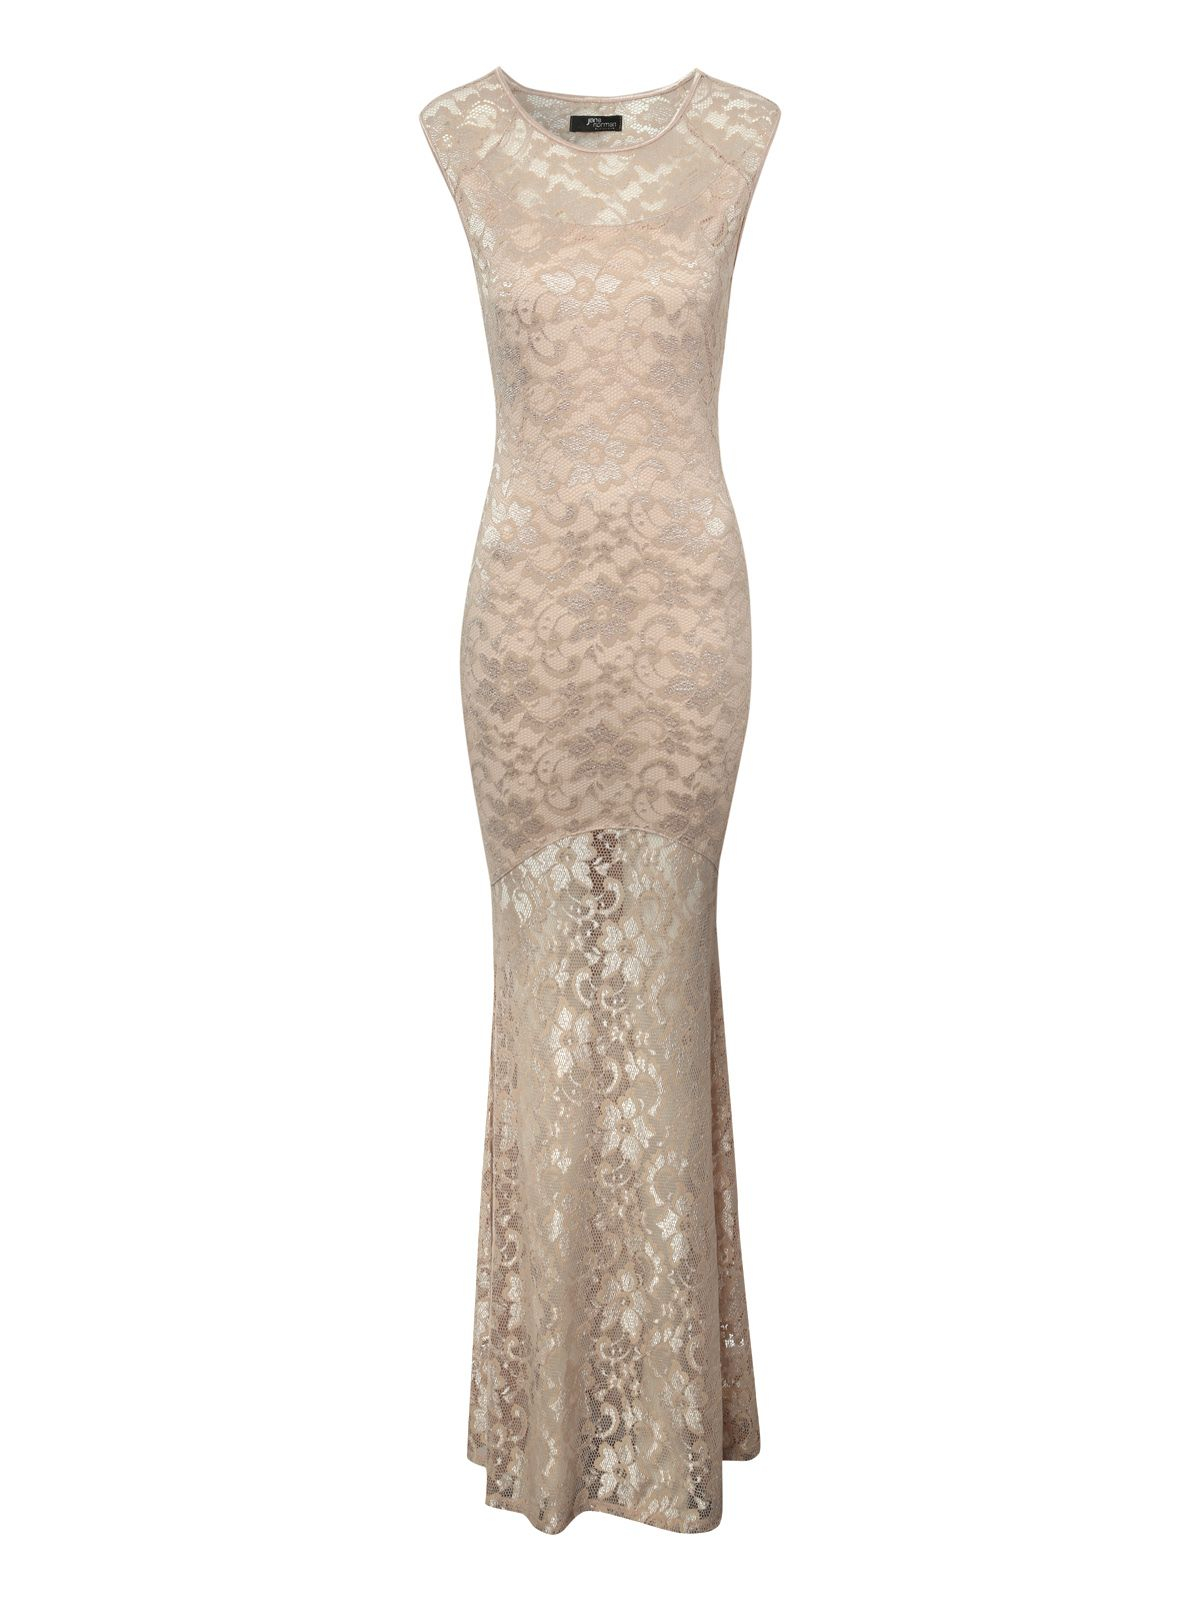 Jane norman Lace Maxi Dress in Natural | Lyst